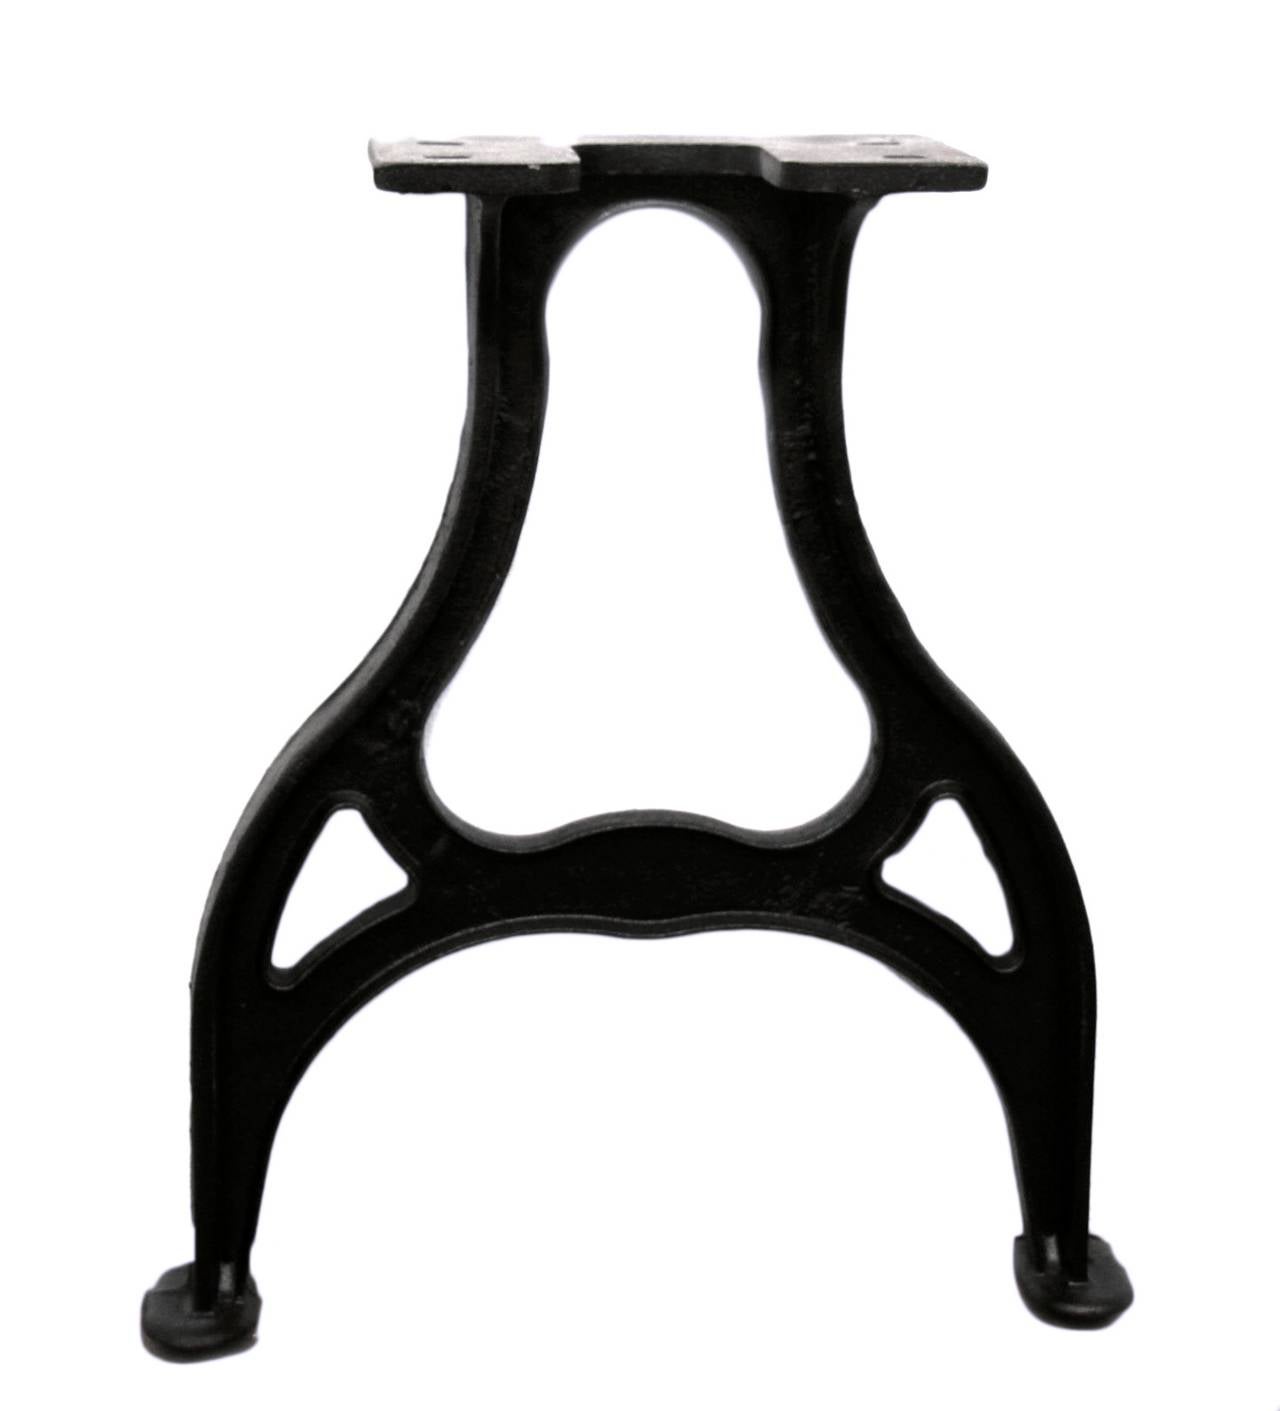 These ductile cast iron table legs have been faithfully reproduced from salvaged machinery from the early 19th century. Their unique shape make impressive looking table legs as well as being extremely stabile. The top plate has four mounting slots